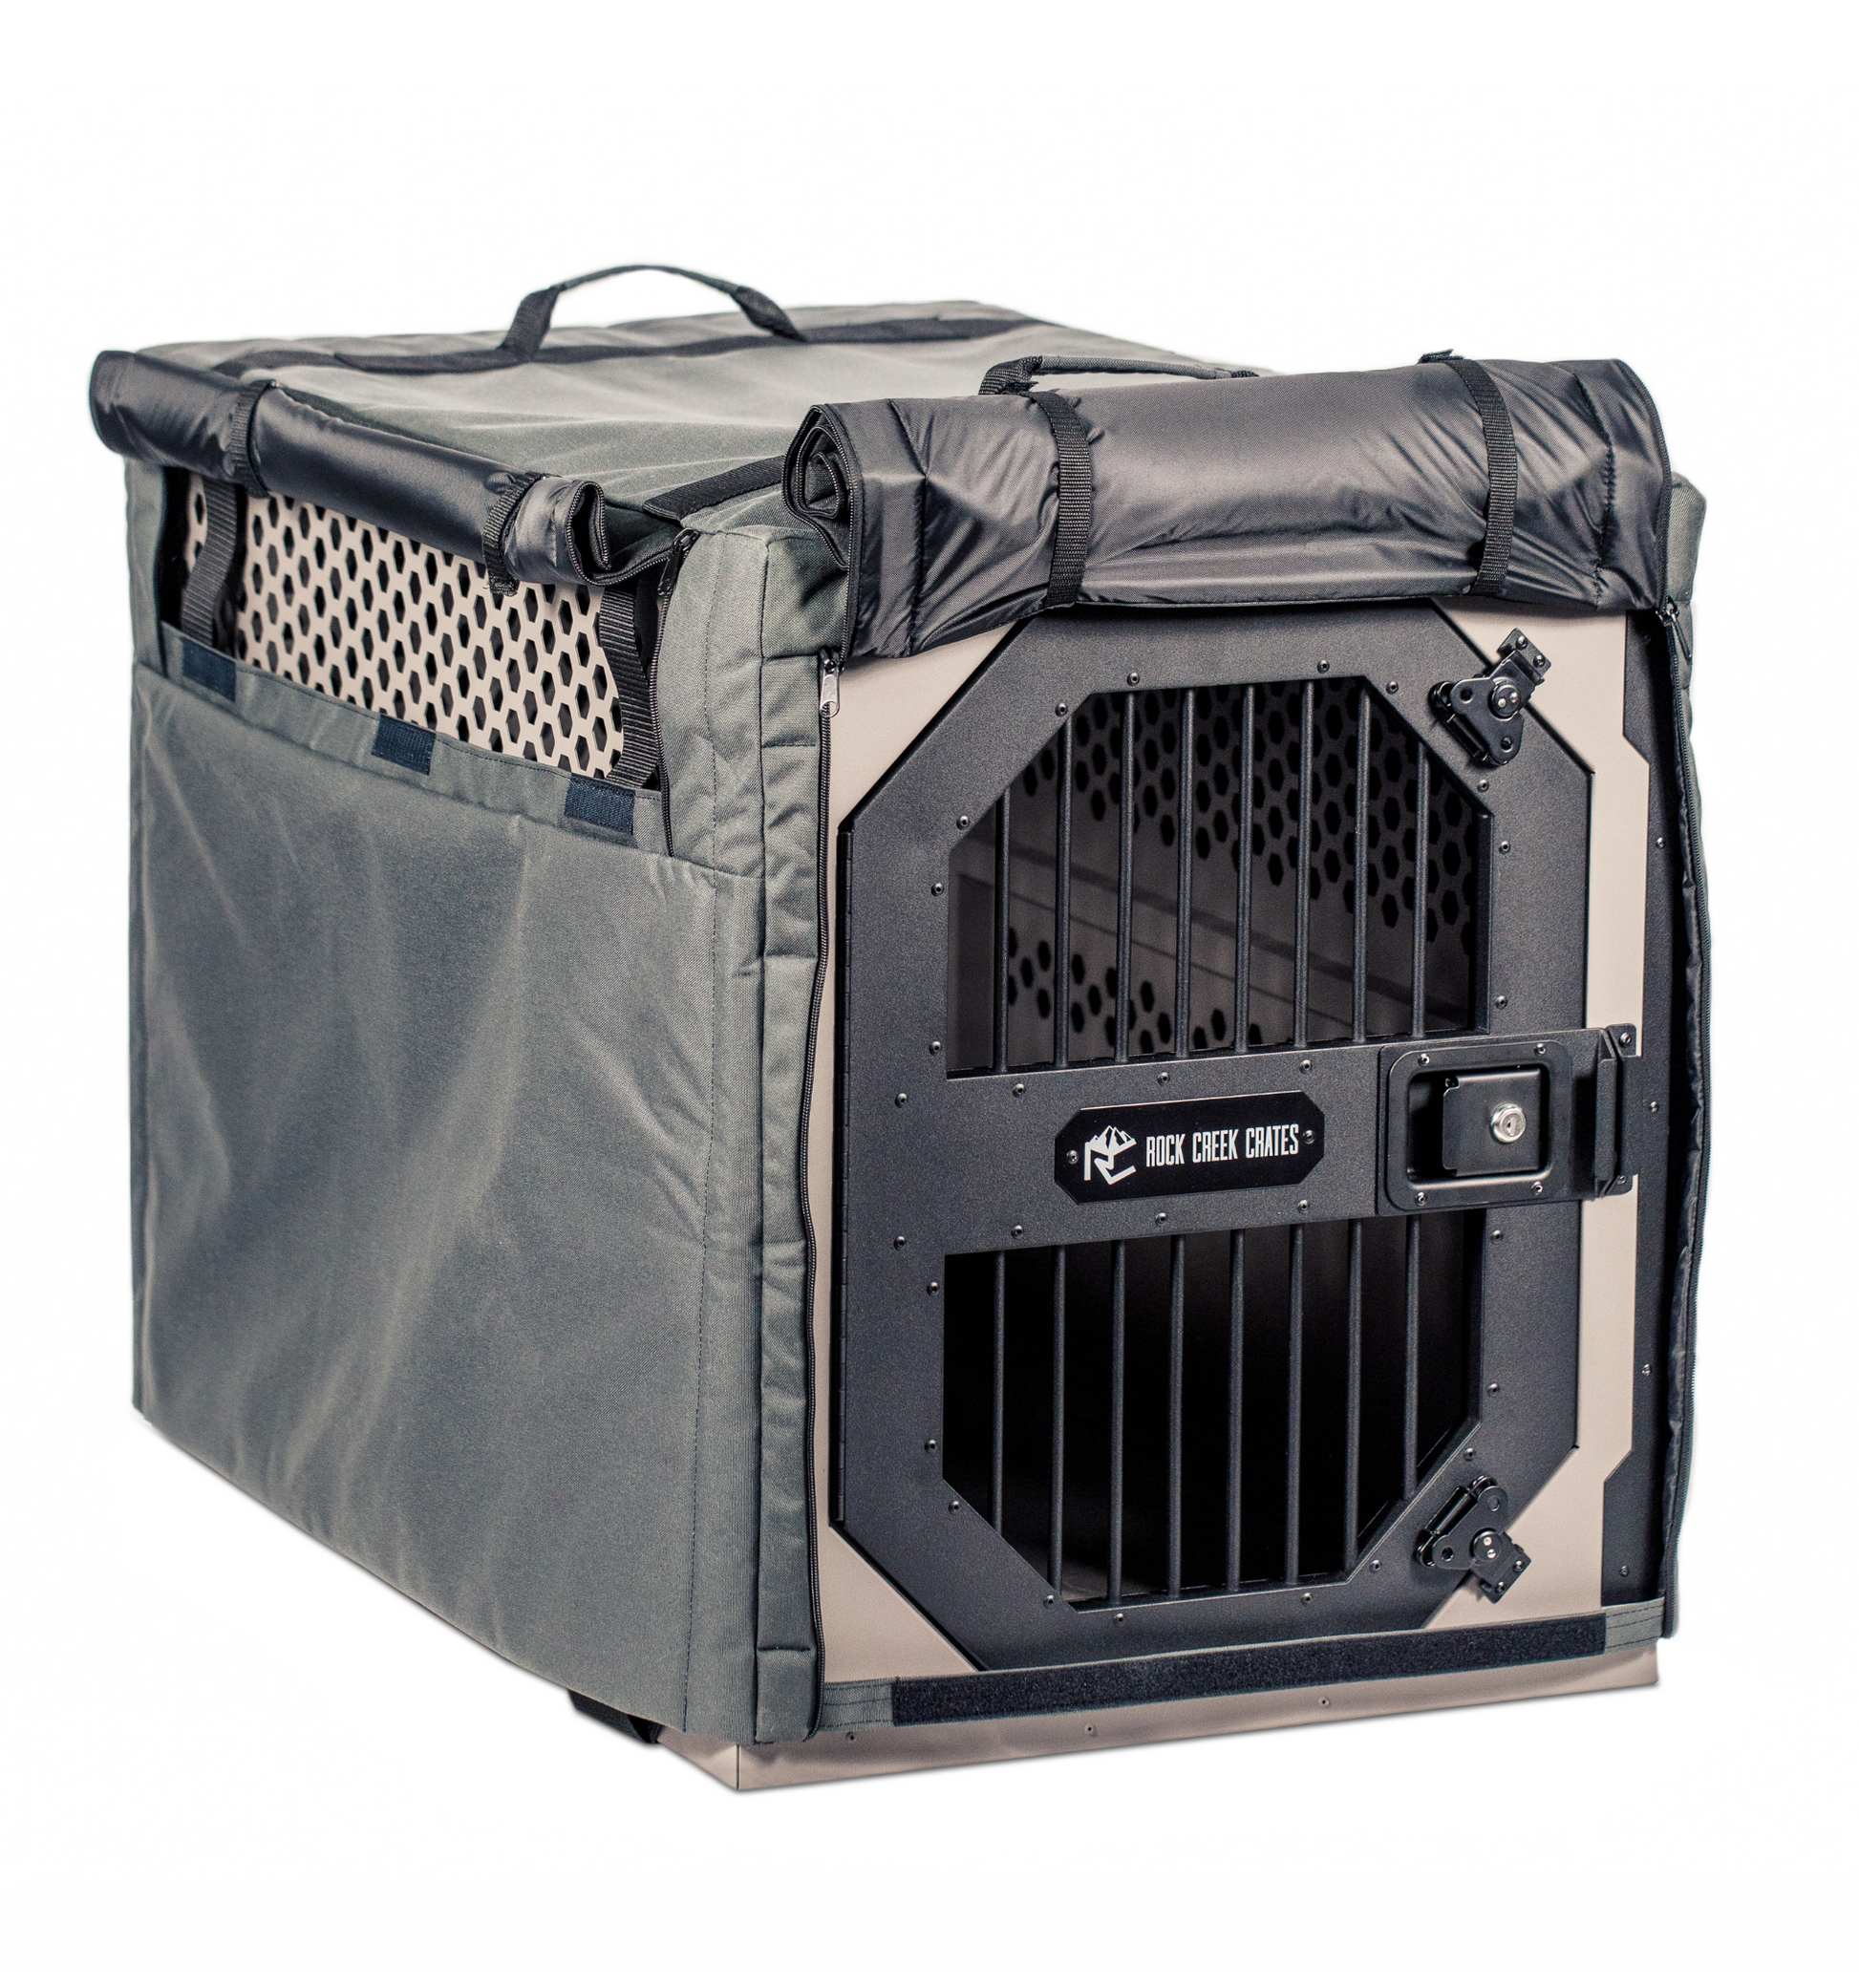 Insulated dog crate cover accessory for stationary dog crates by Rock Creek Crates